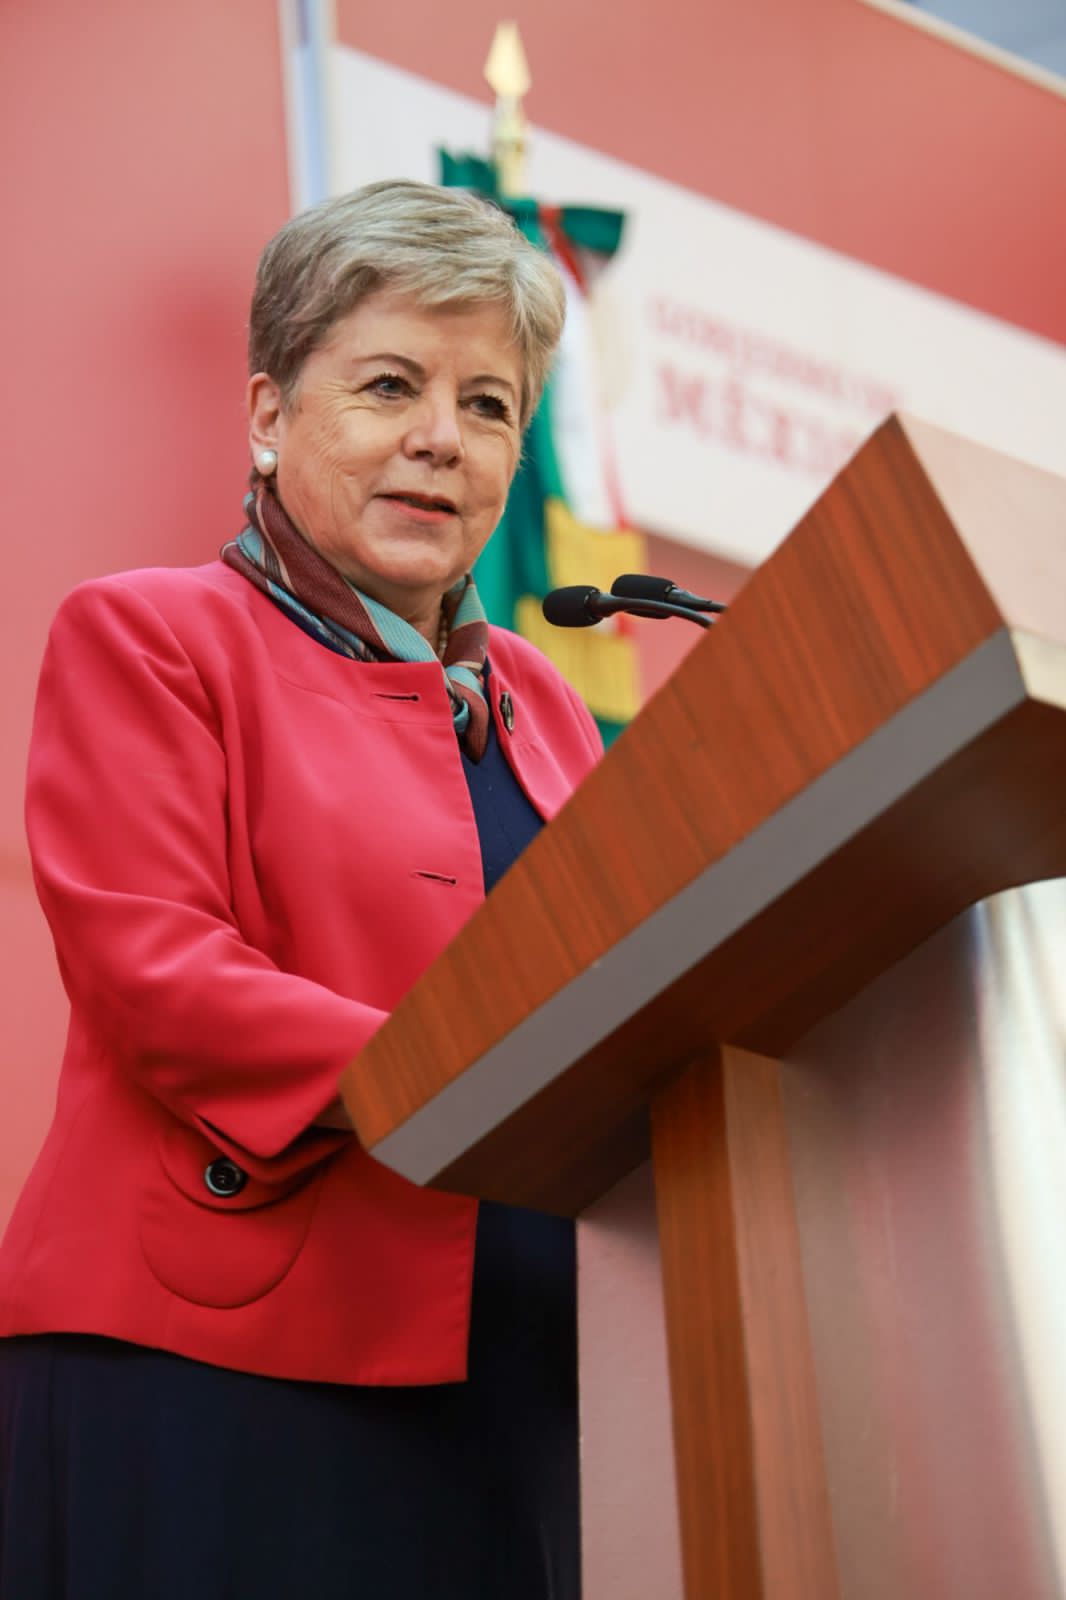 Diplomacy must be at the service of the people: Alicia Bárcena